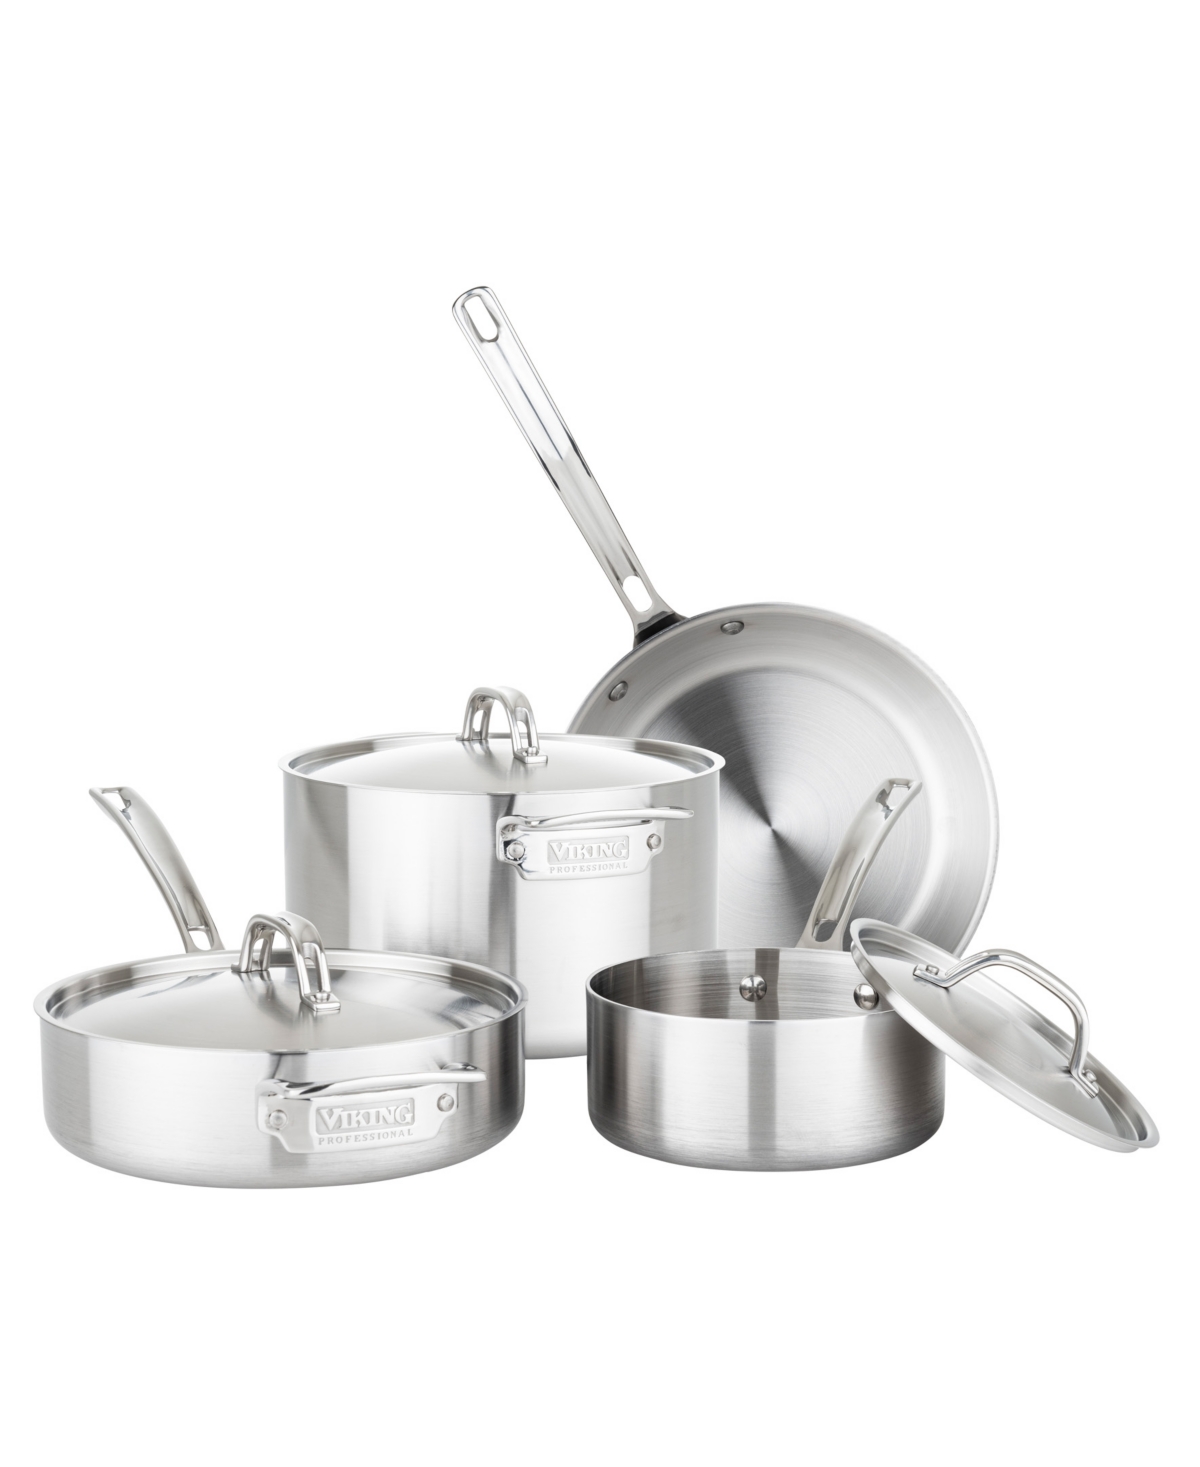 Viking Professional 5-ply Stainless Steel 7-piece Cookware Set